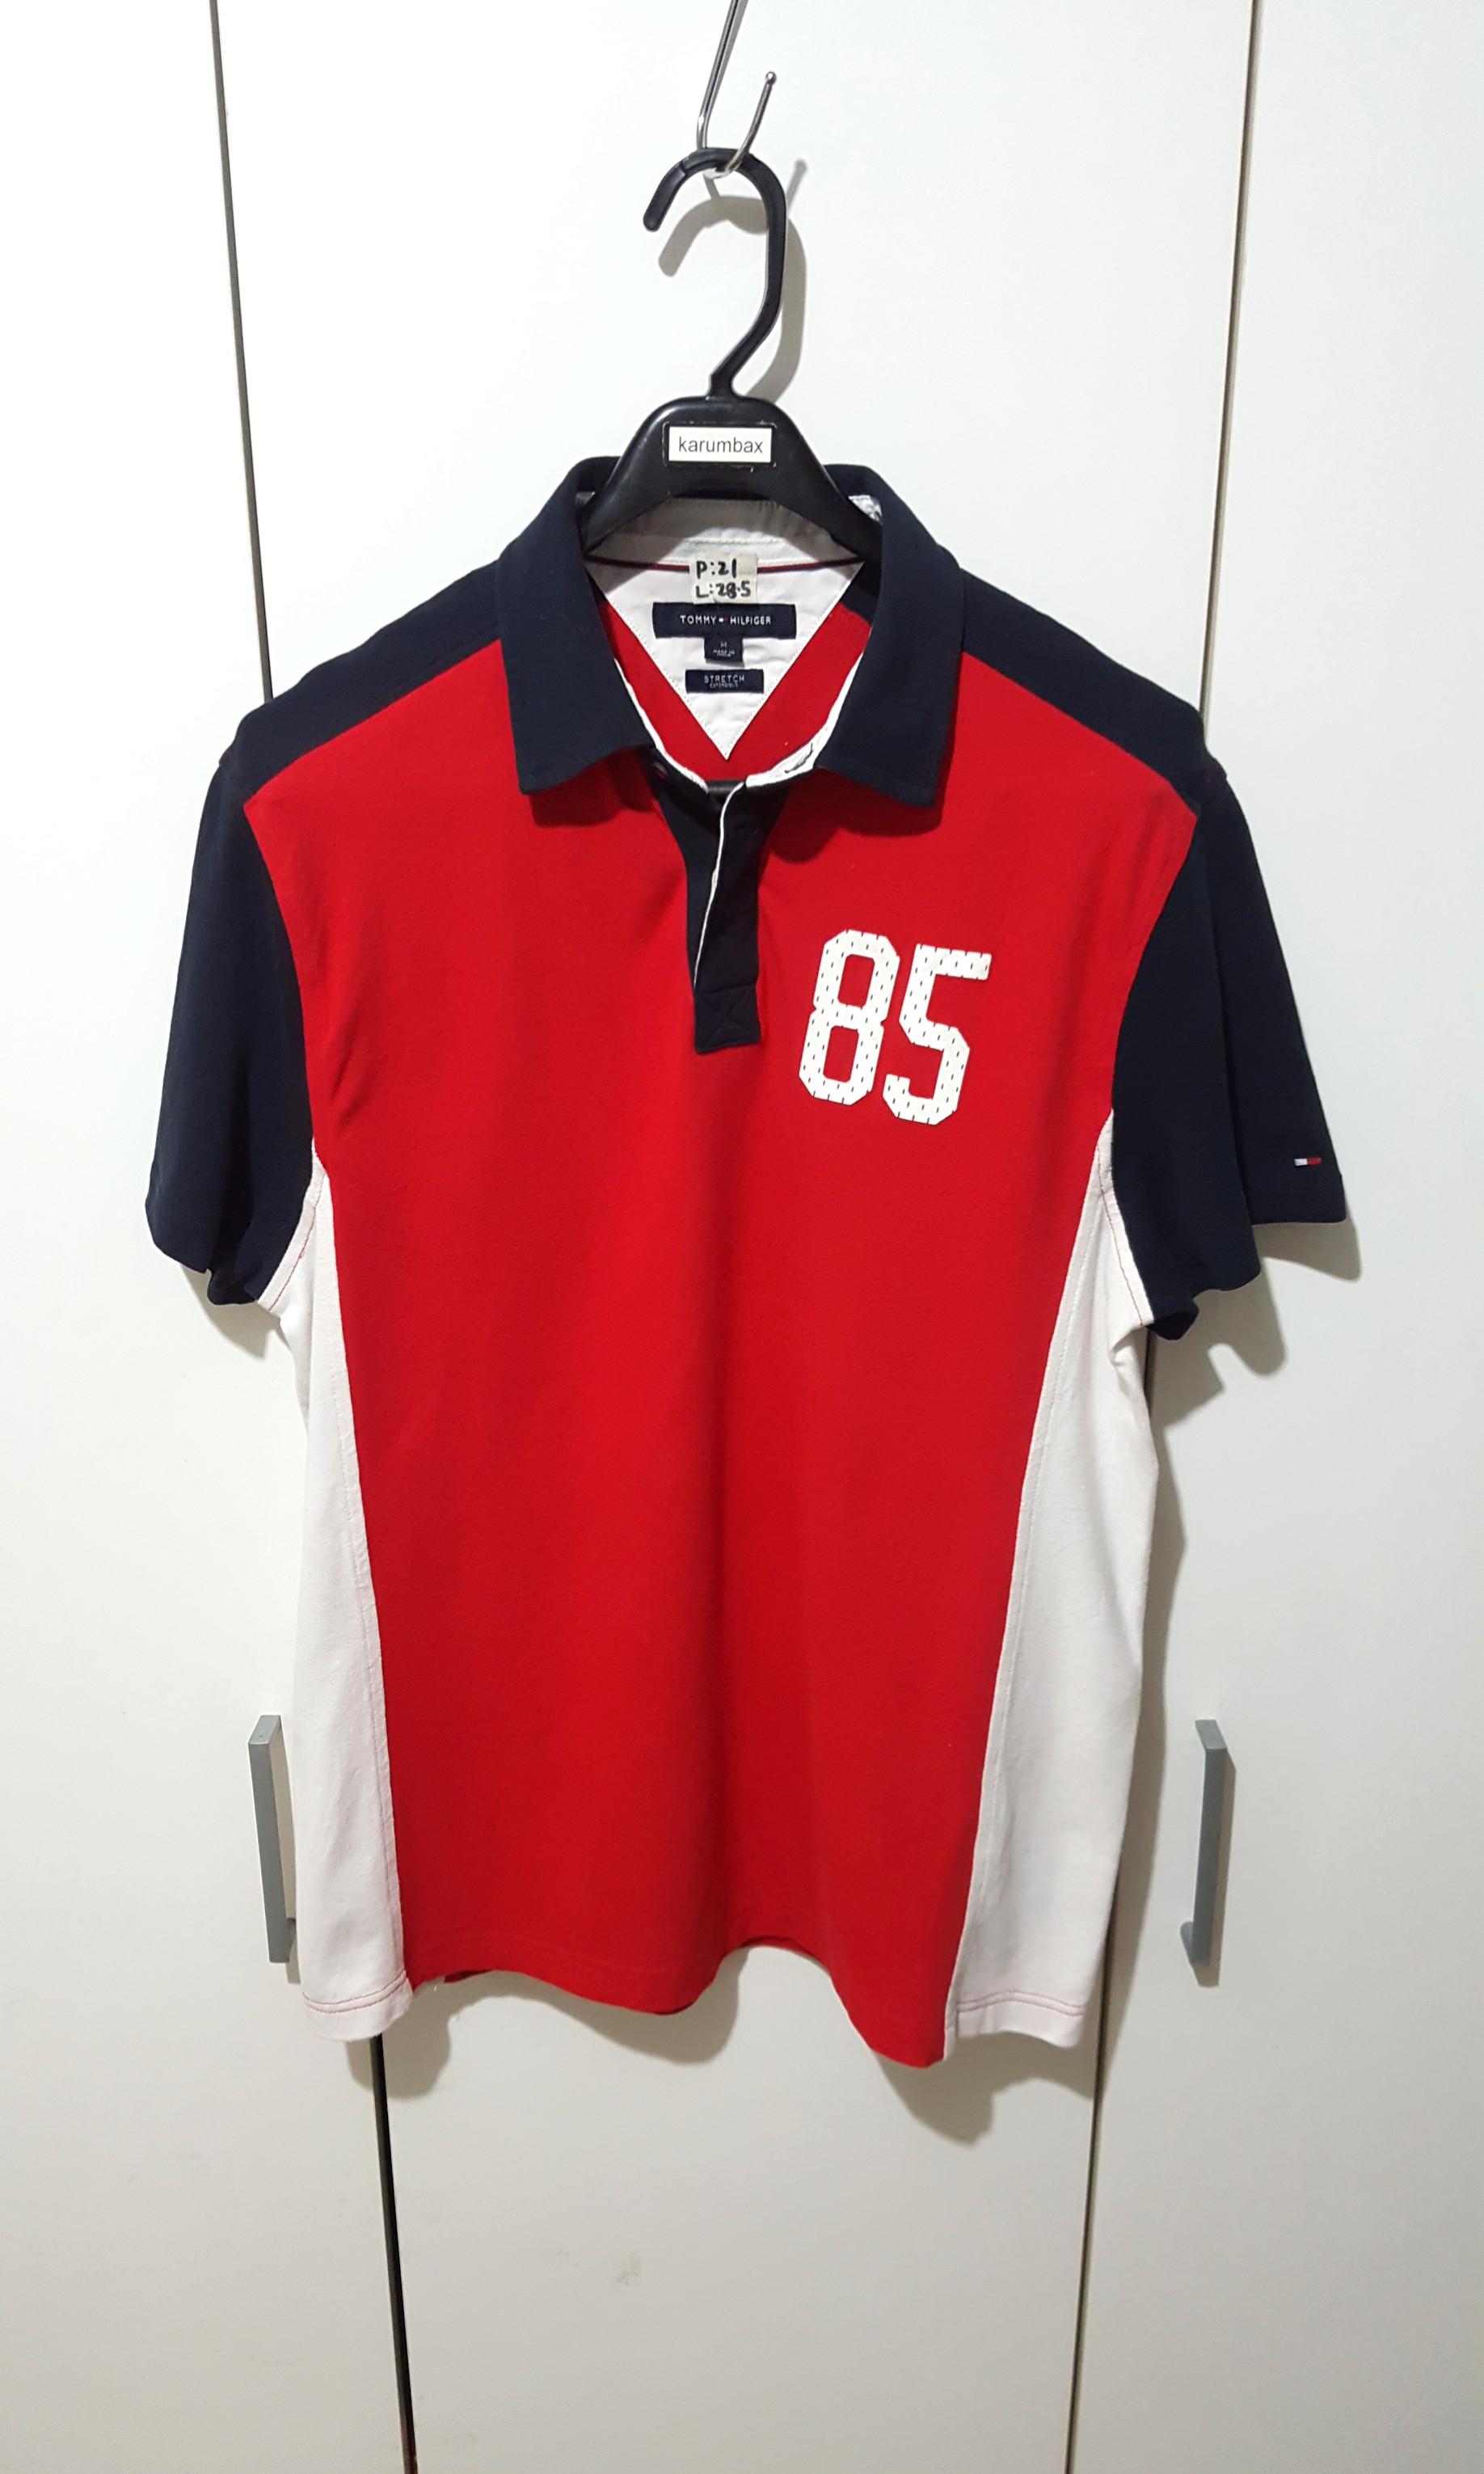 tommy hilfiger 85 polo